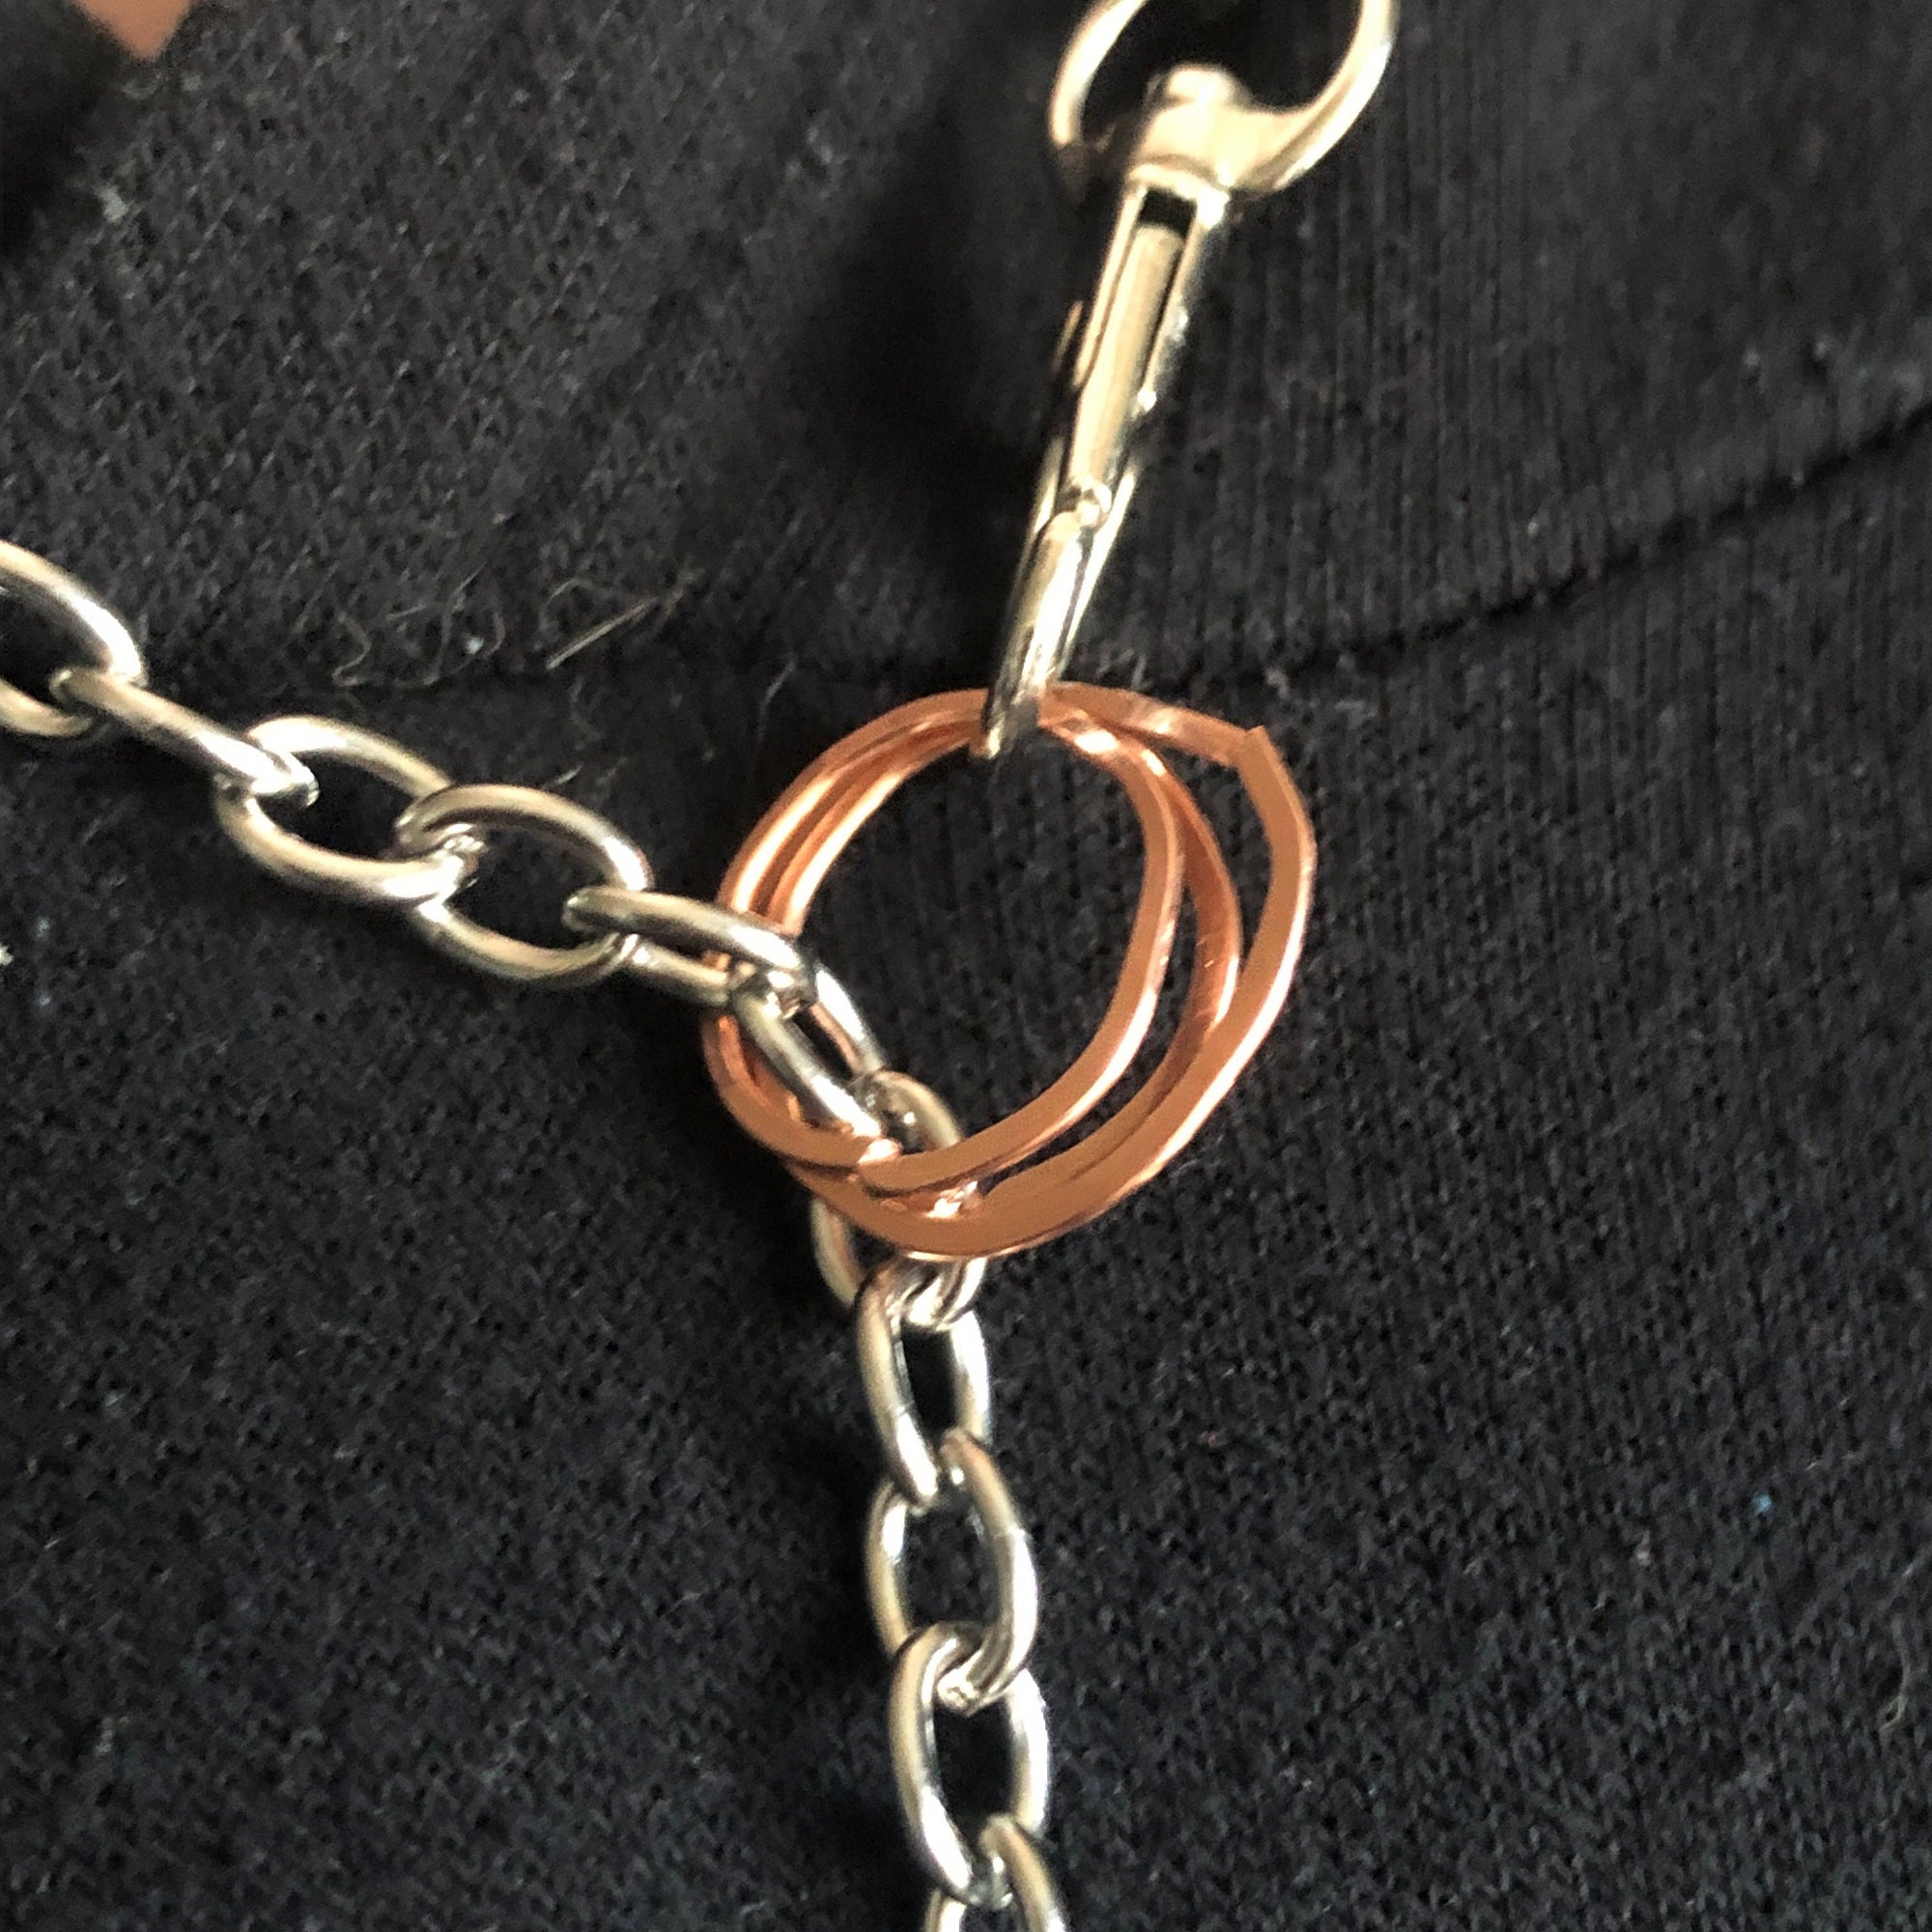 Personalized choker rose gold collar vamp O ring collar for women • Infinity collar long statement lariat rope o ring collar, copper twist